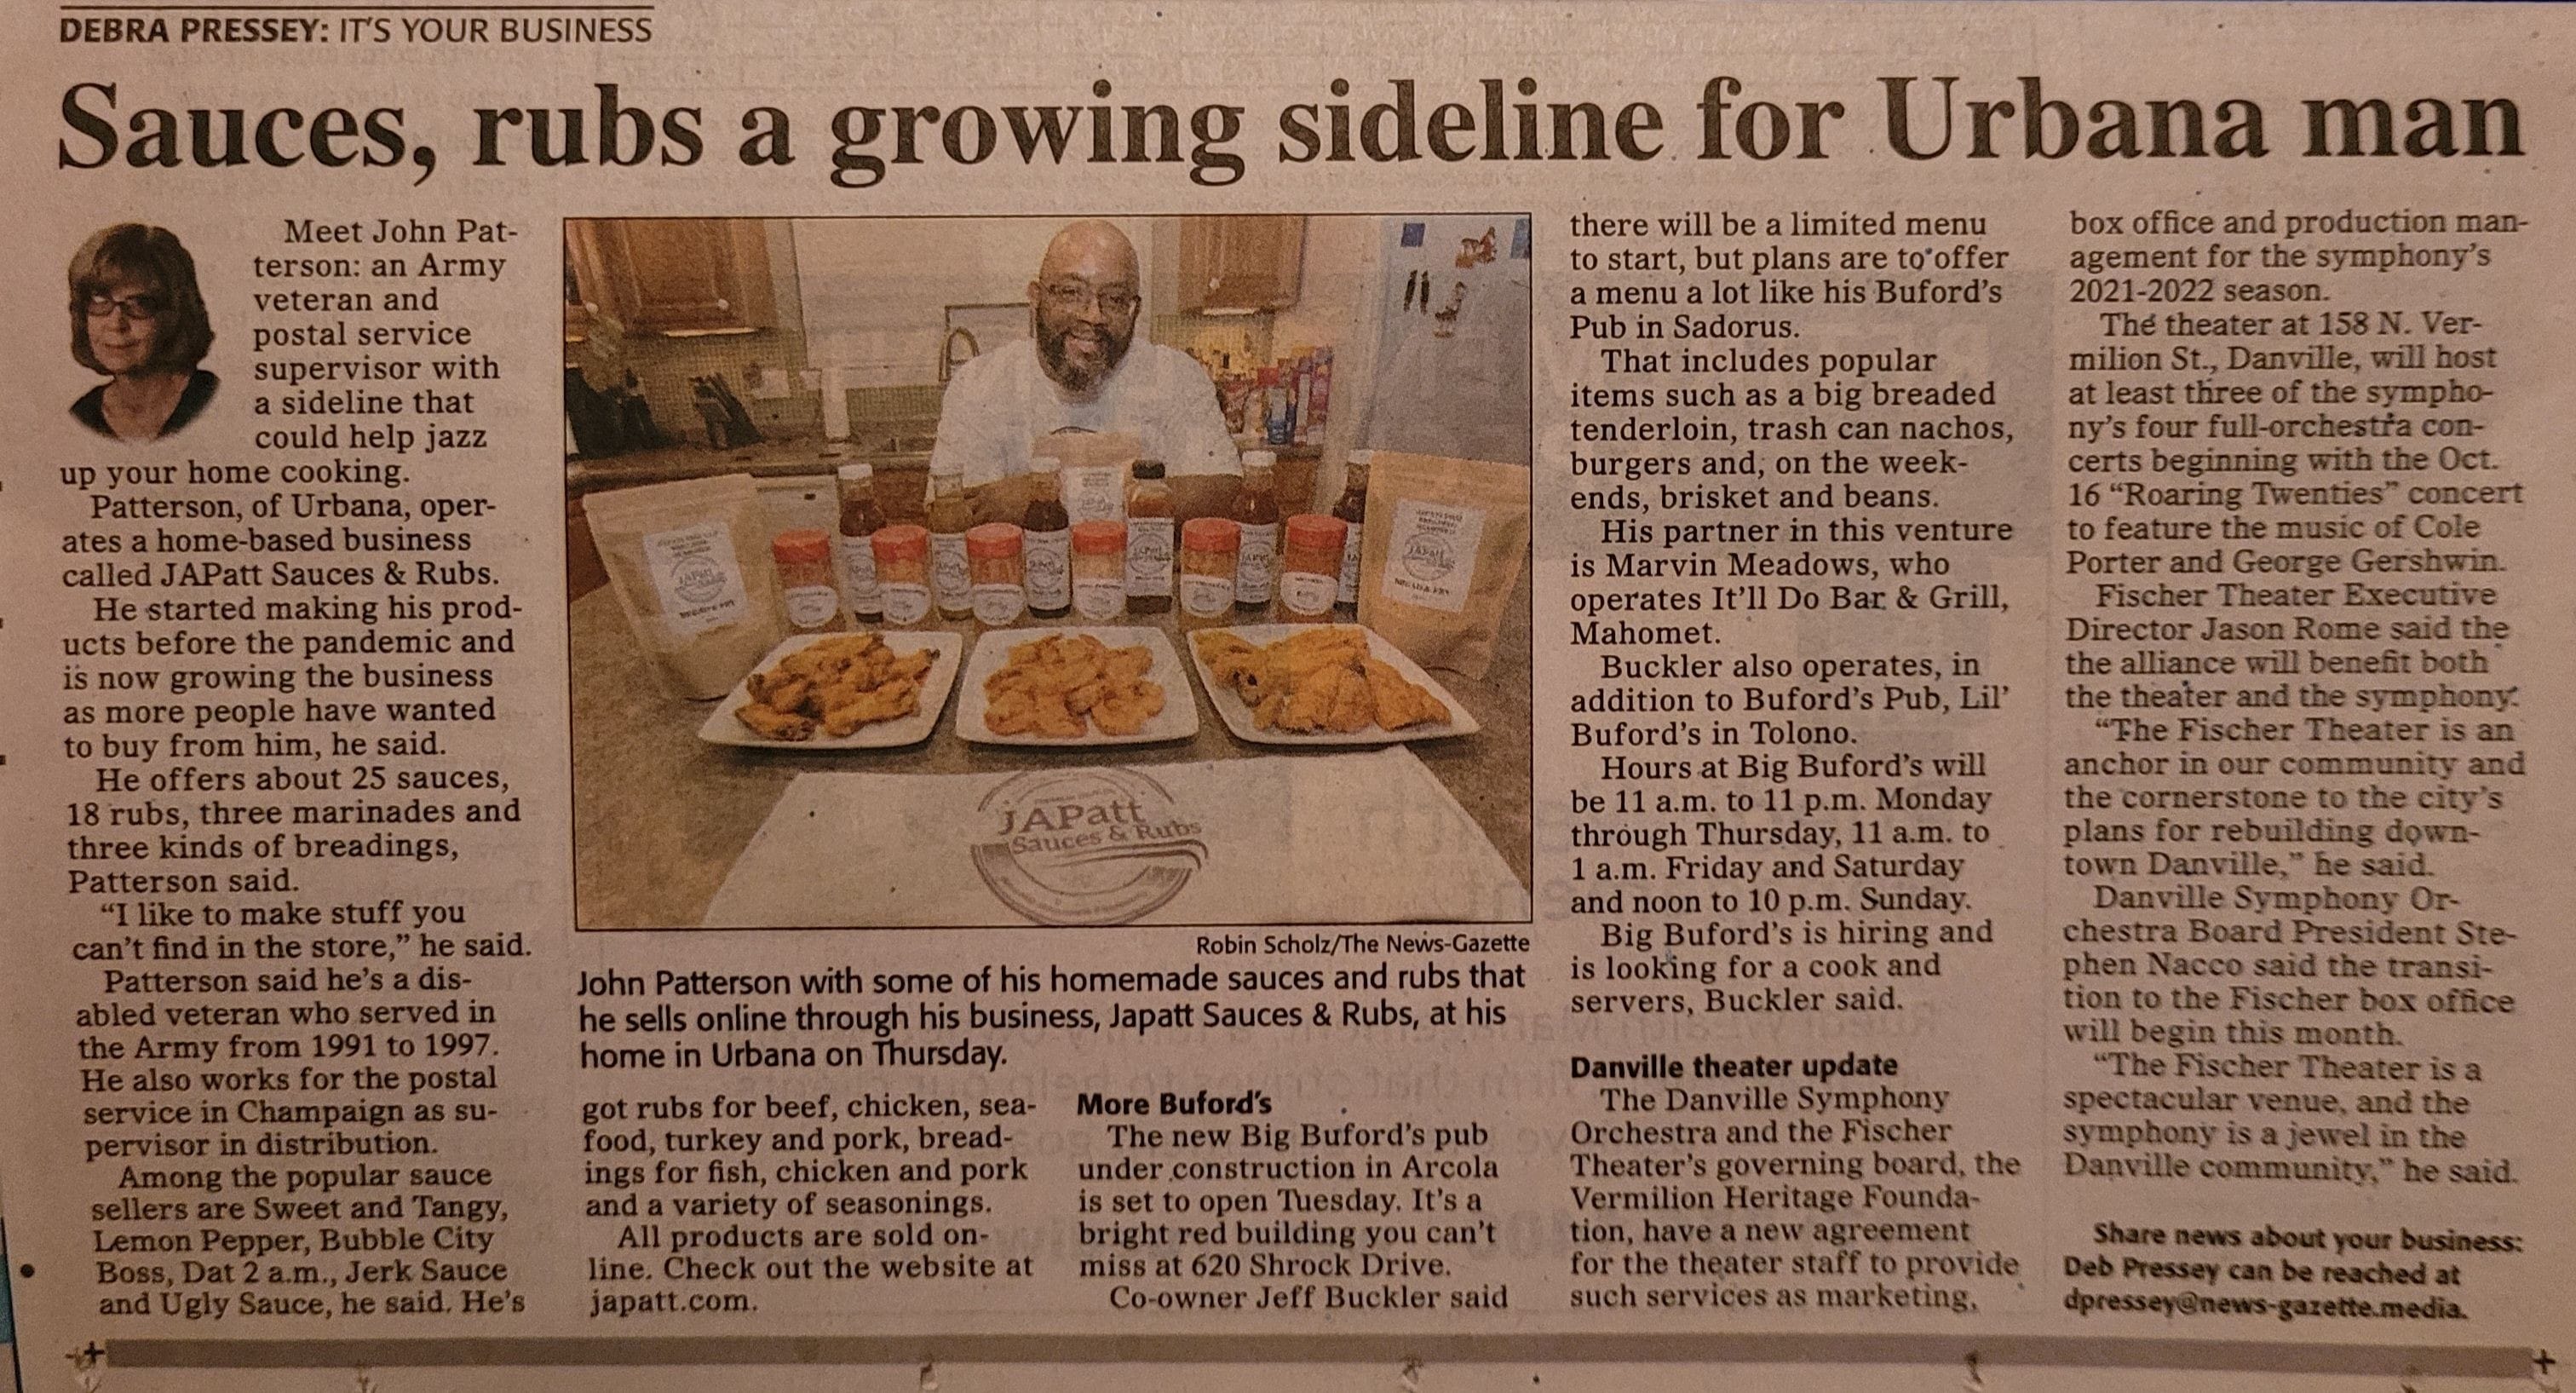 JAPatt: Sauces and Rubs was in the News Gazette